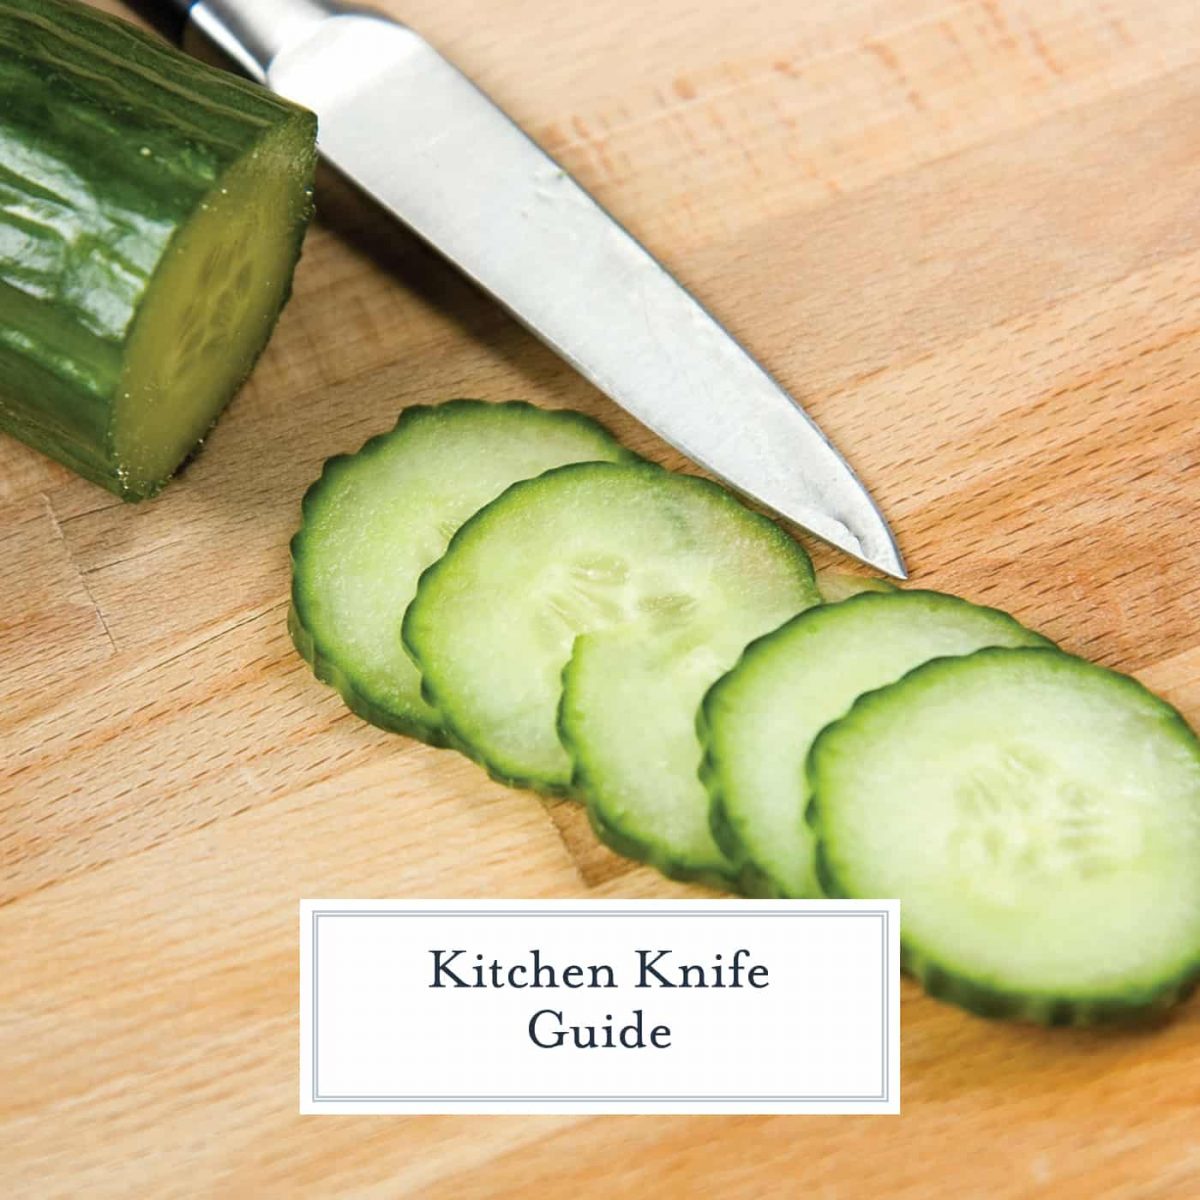 Kitchen Knife Guide includes how to pick the correct knife for the job, take proper care to ensure longevity and practice knife safety. #kitchenknifeguide www.savoryexperiments.com